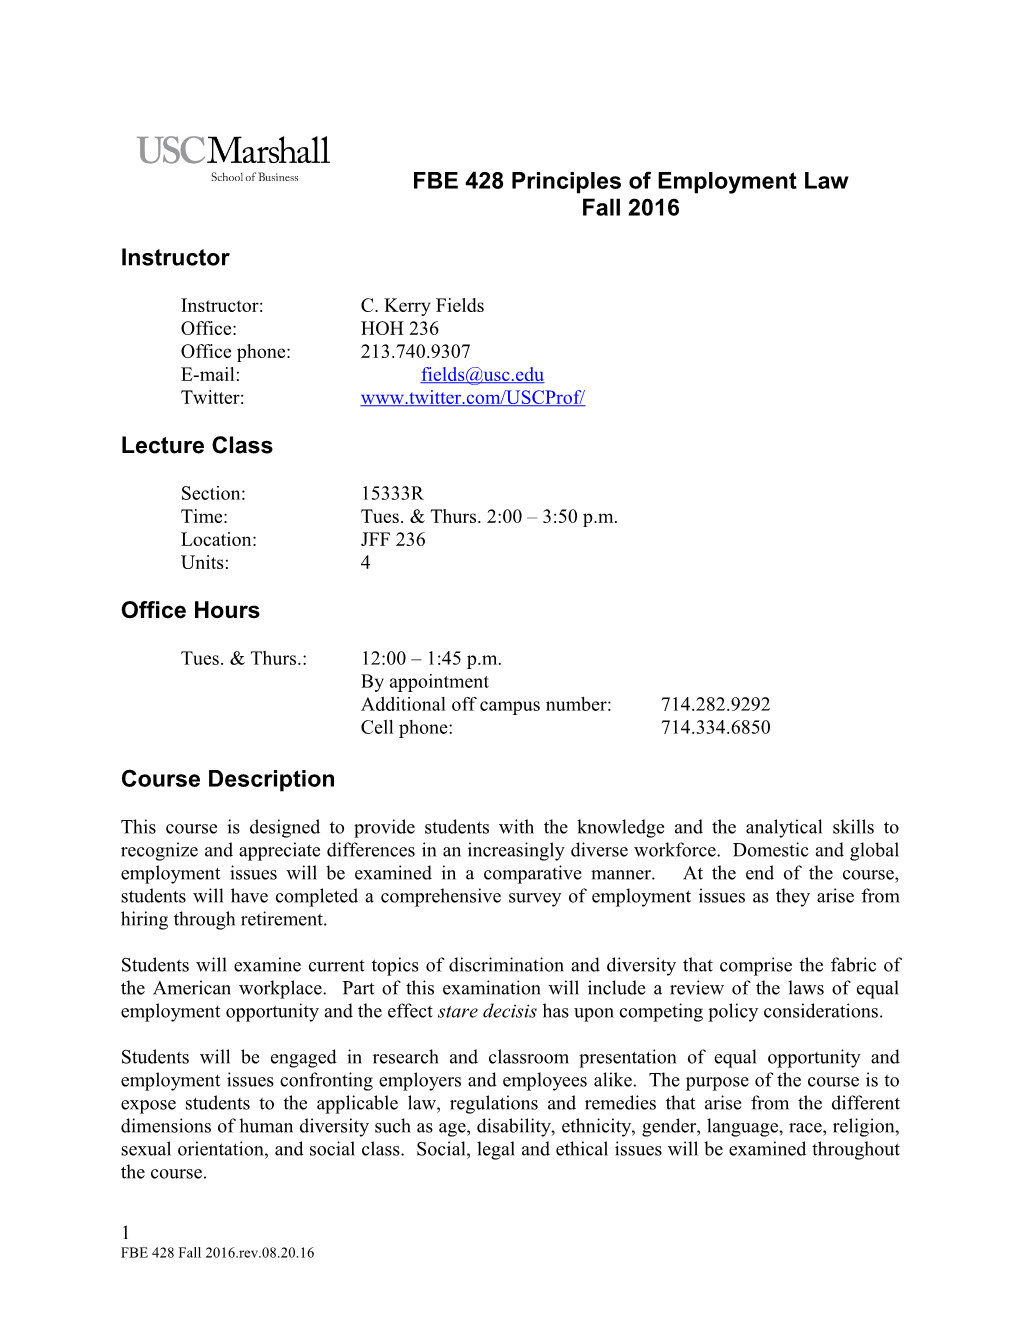 FBE 428Principles of Employment Law